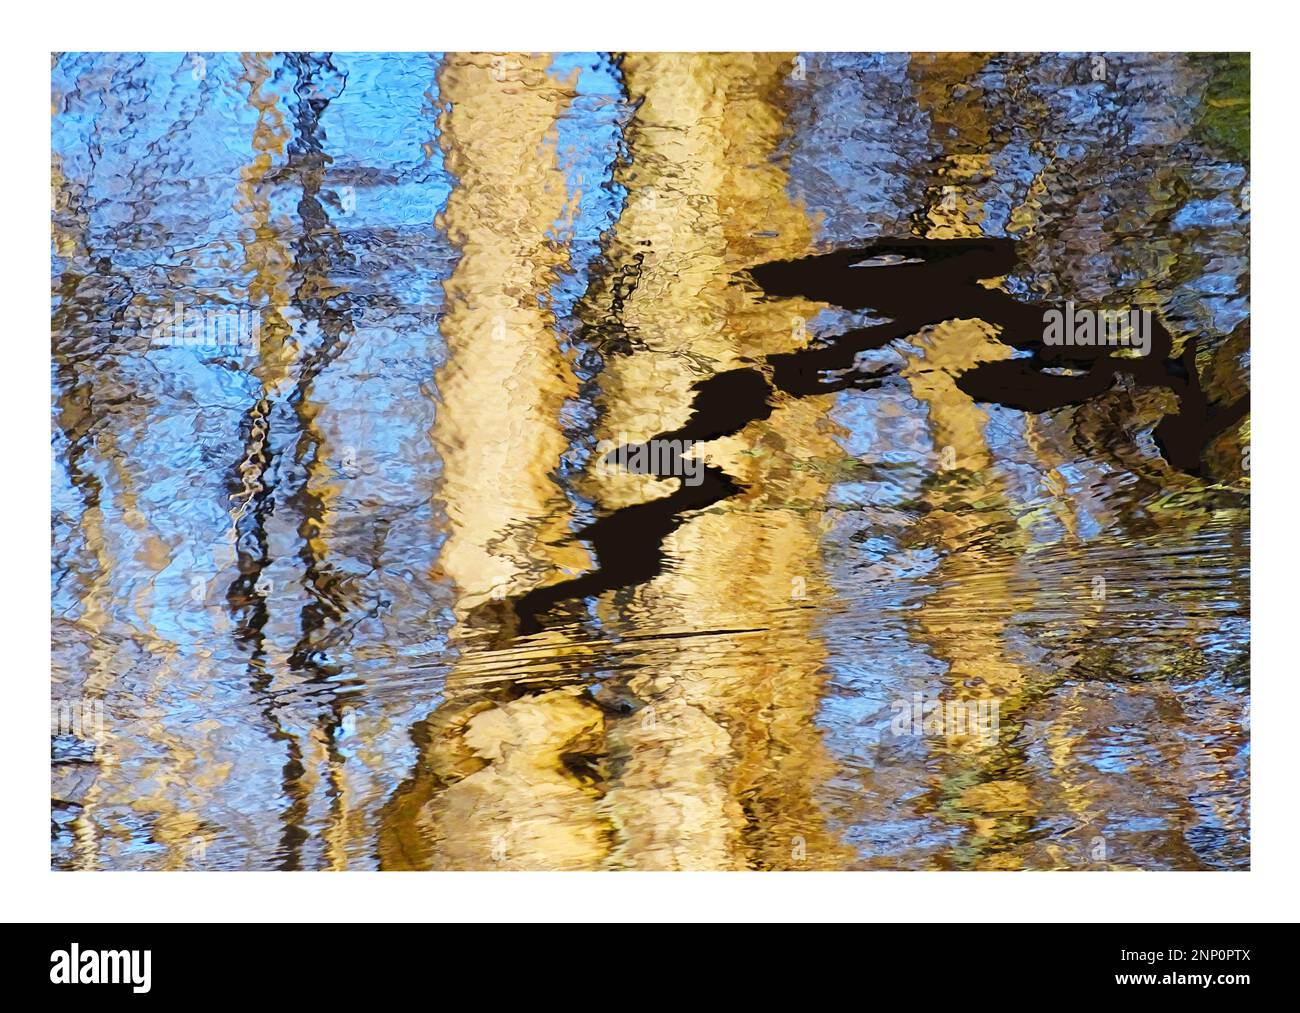 Abstract photograph of ripples and reflections in water Stock Photo